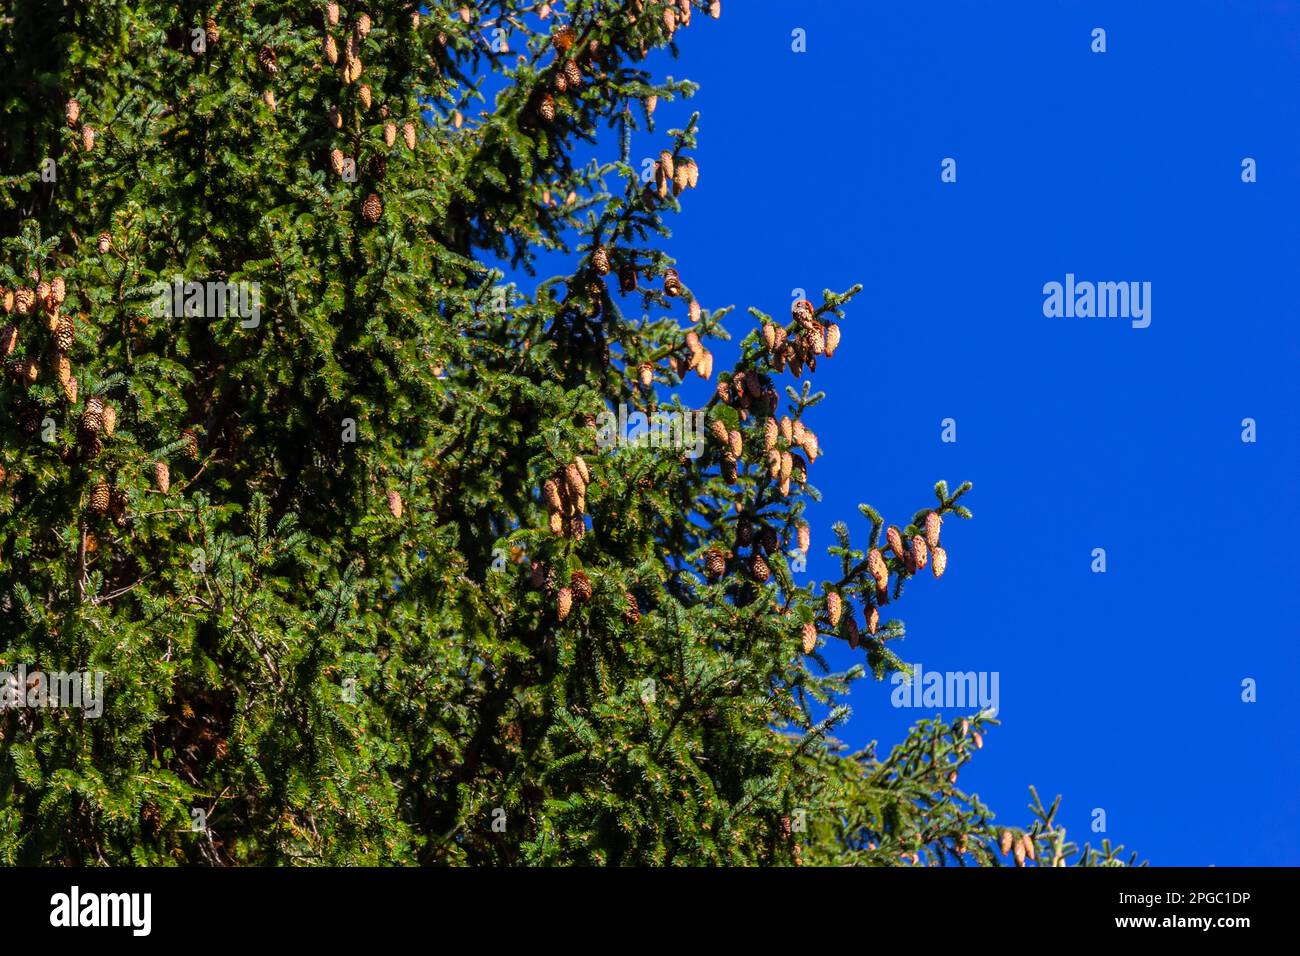 Branches with cones European spruce Picea abies on a background of blue sky. Stock Photo